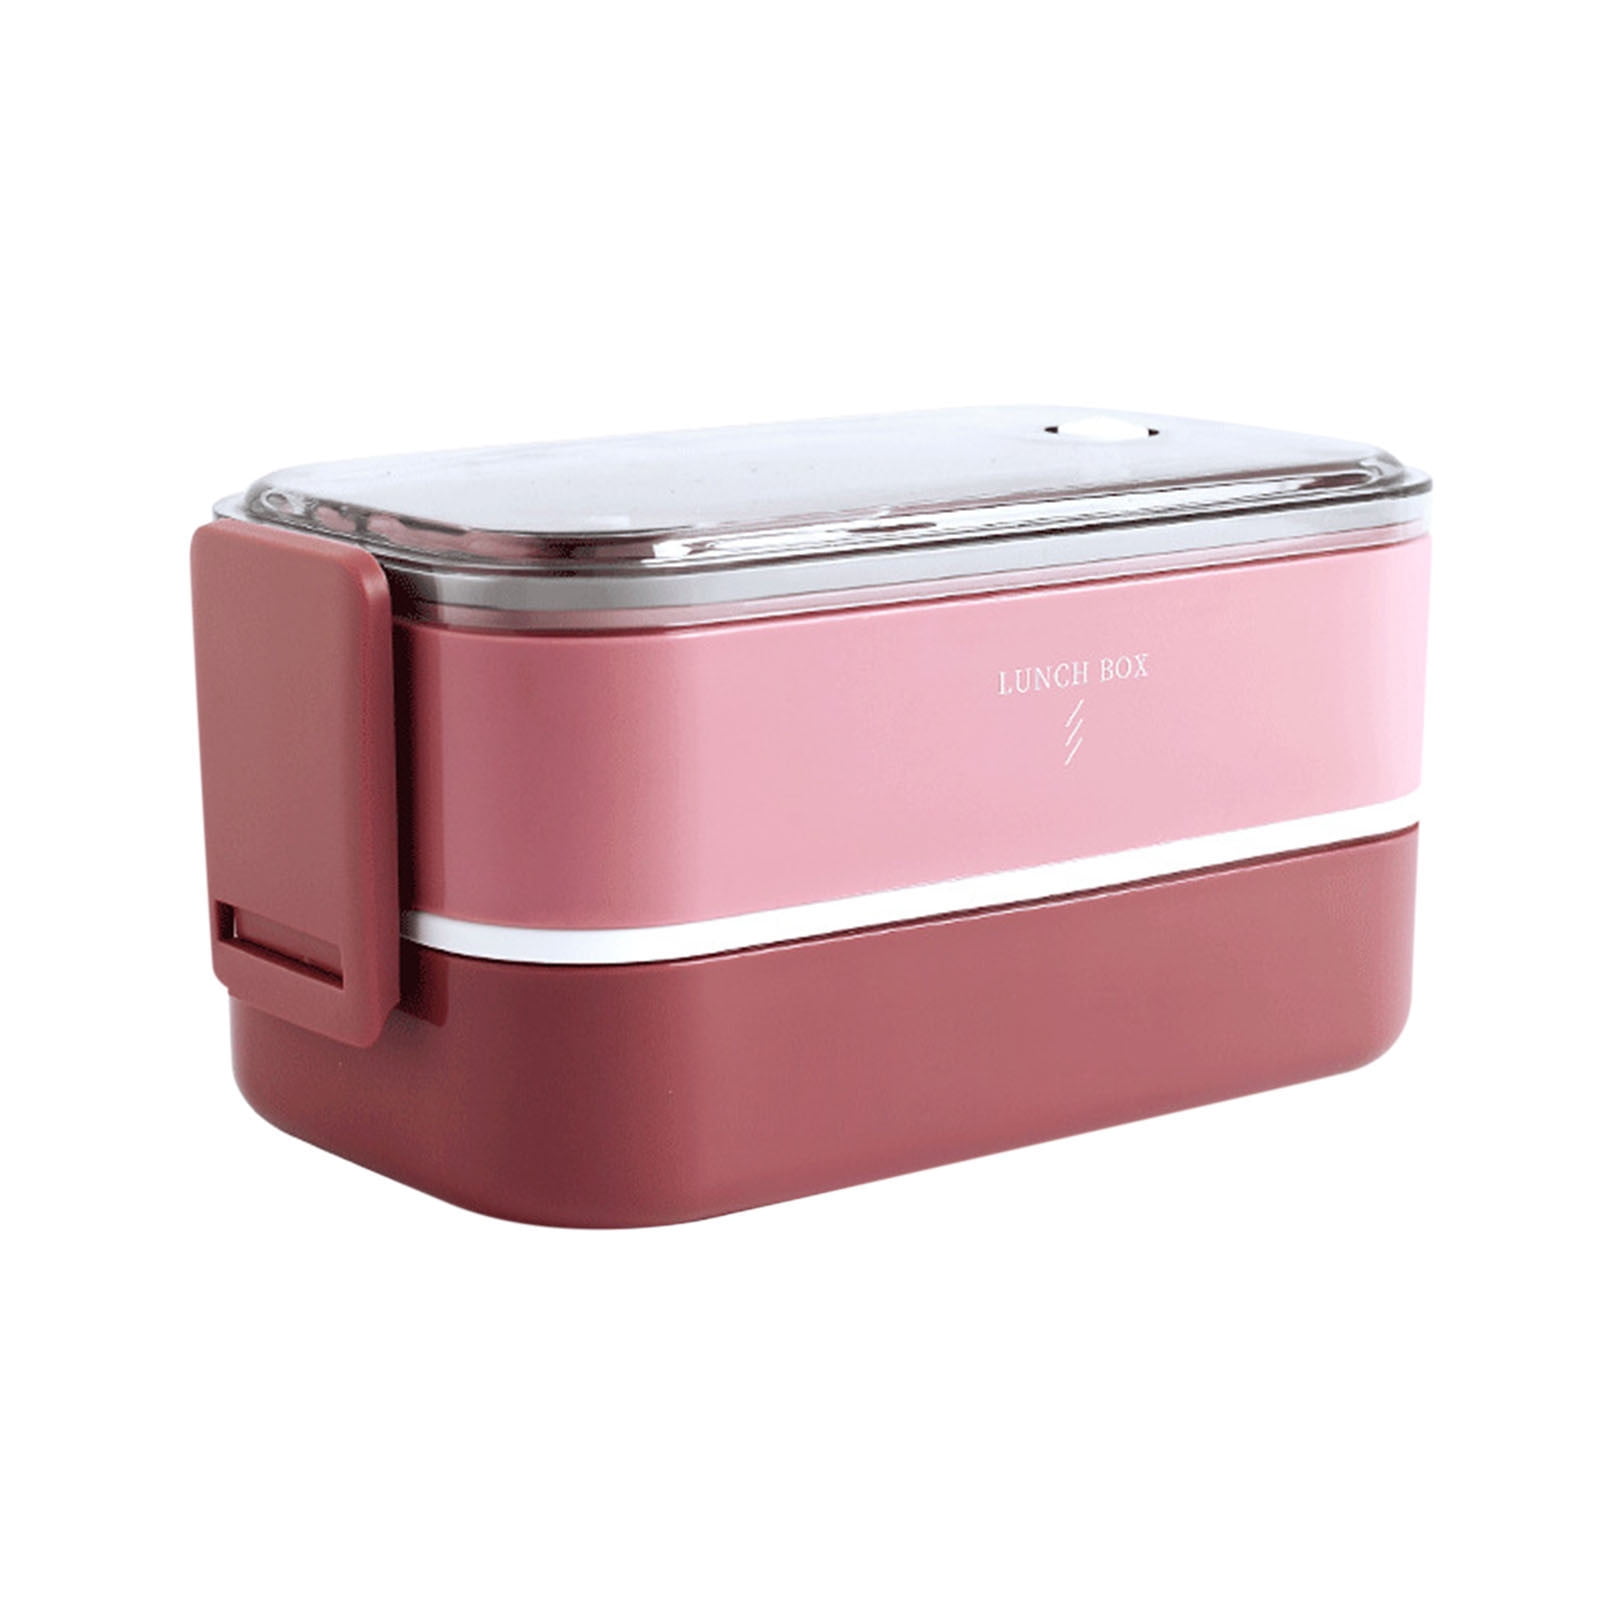 Bento Lunch Box, Aousthop Stainless Steel Lunch Boxes for Student